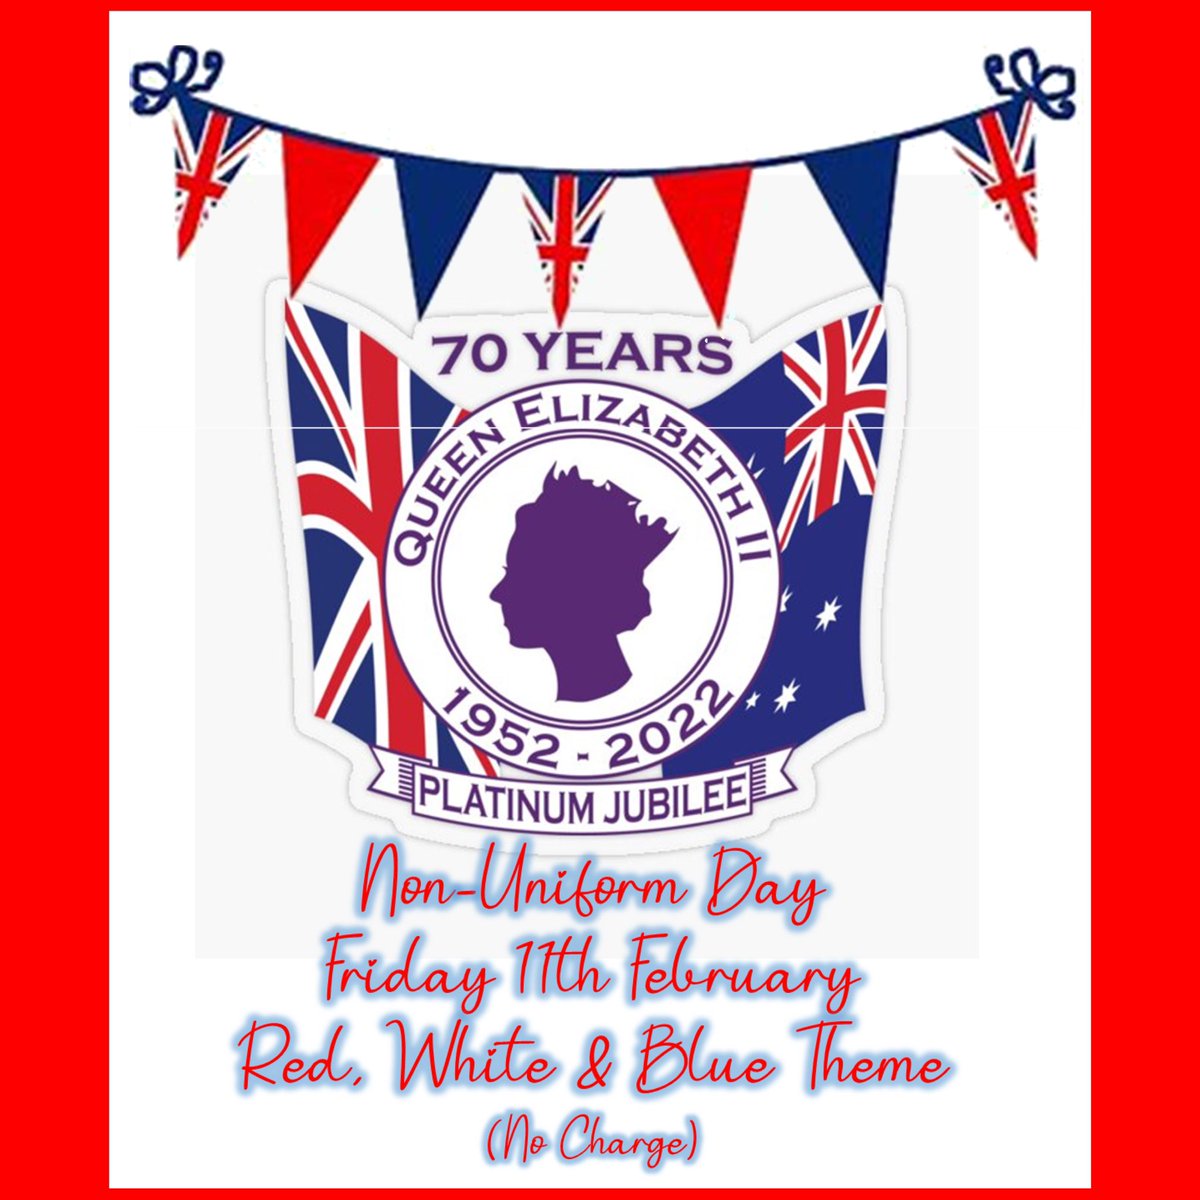 Platinum Jubilee On Friday 11th February we are starting our Jubilee celebrations to mark the Queens 70 year reign. We are holding a non uniform day with a red, white and blue theme - no charge!